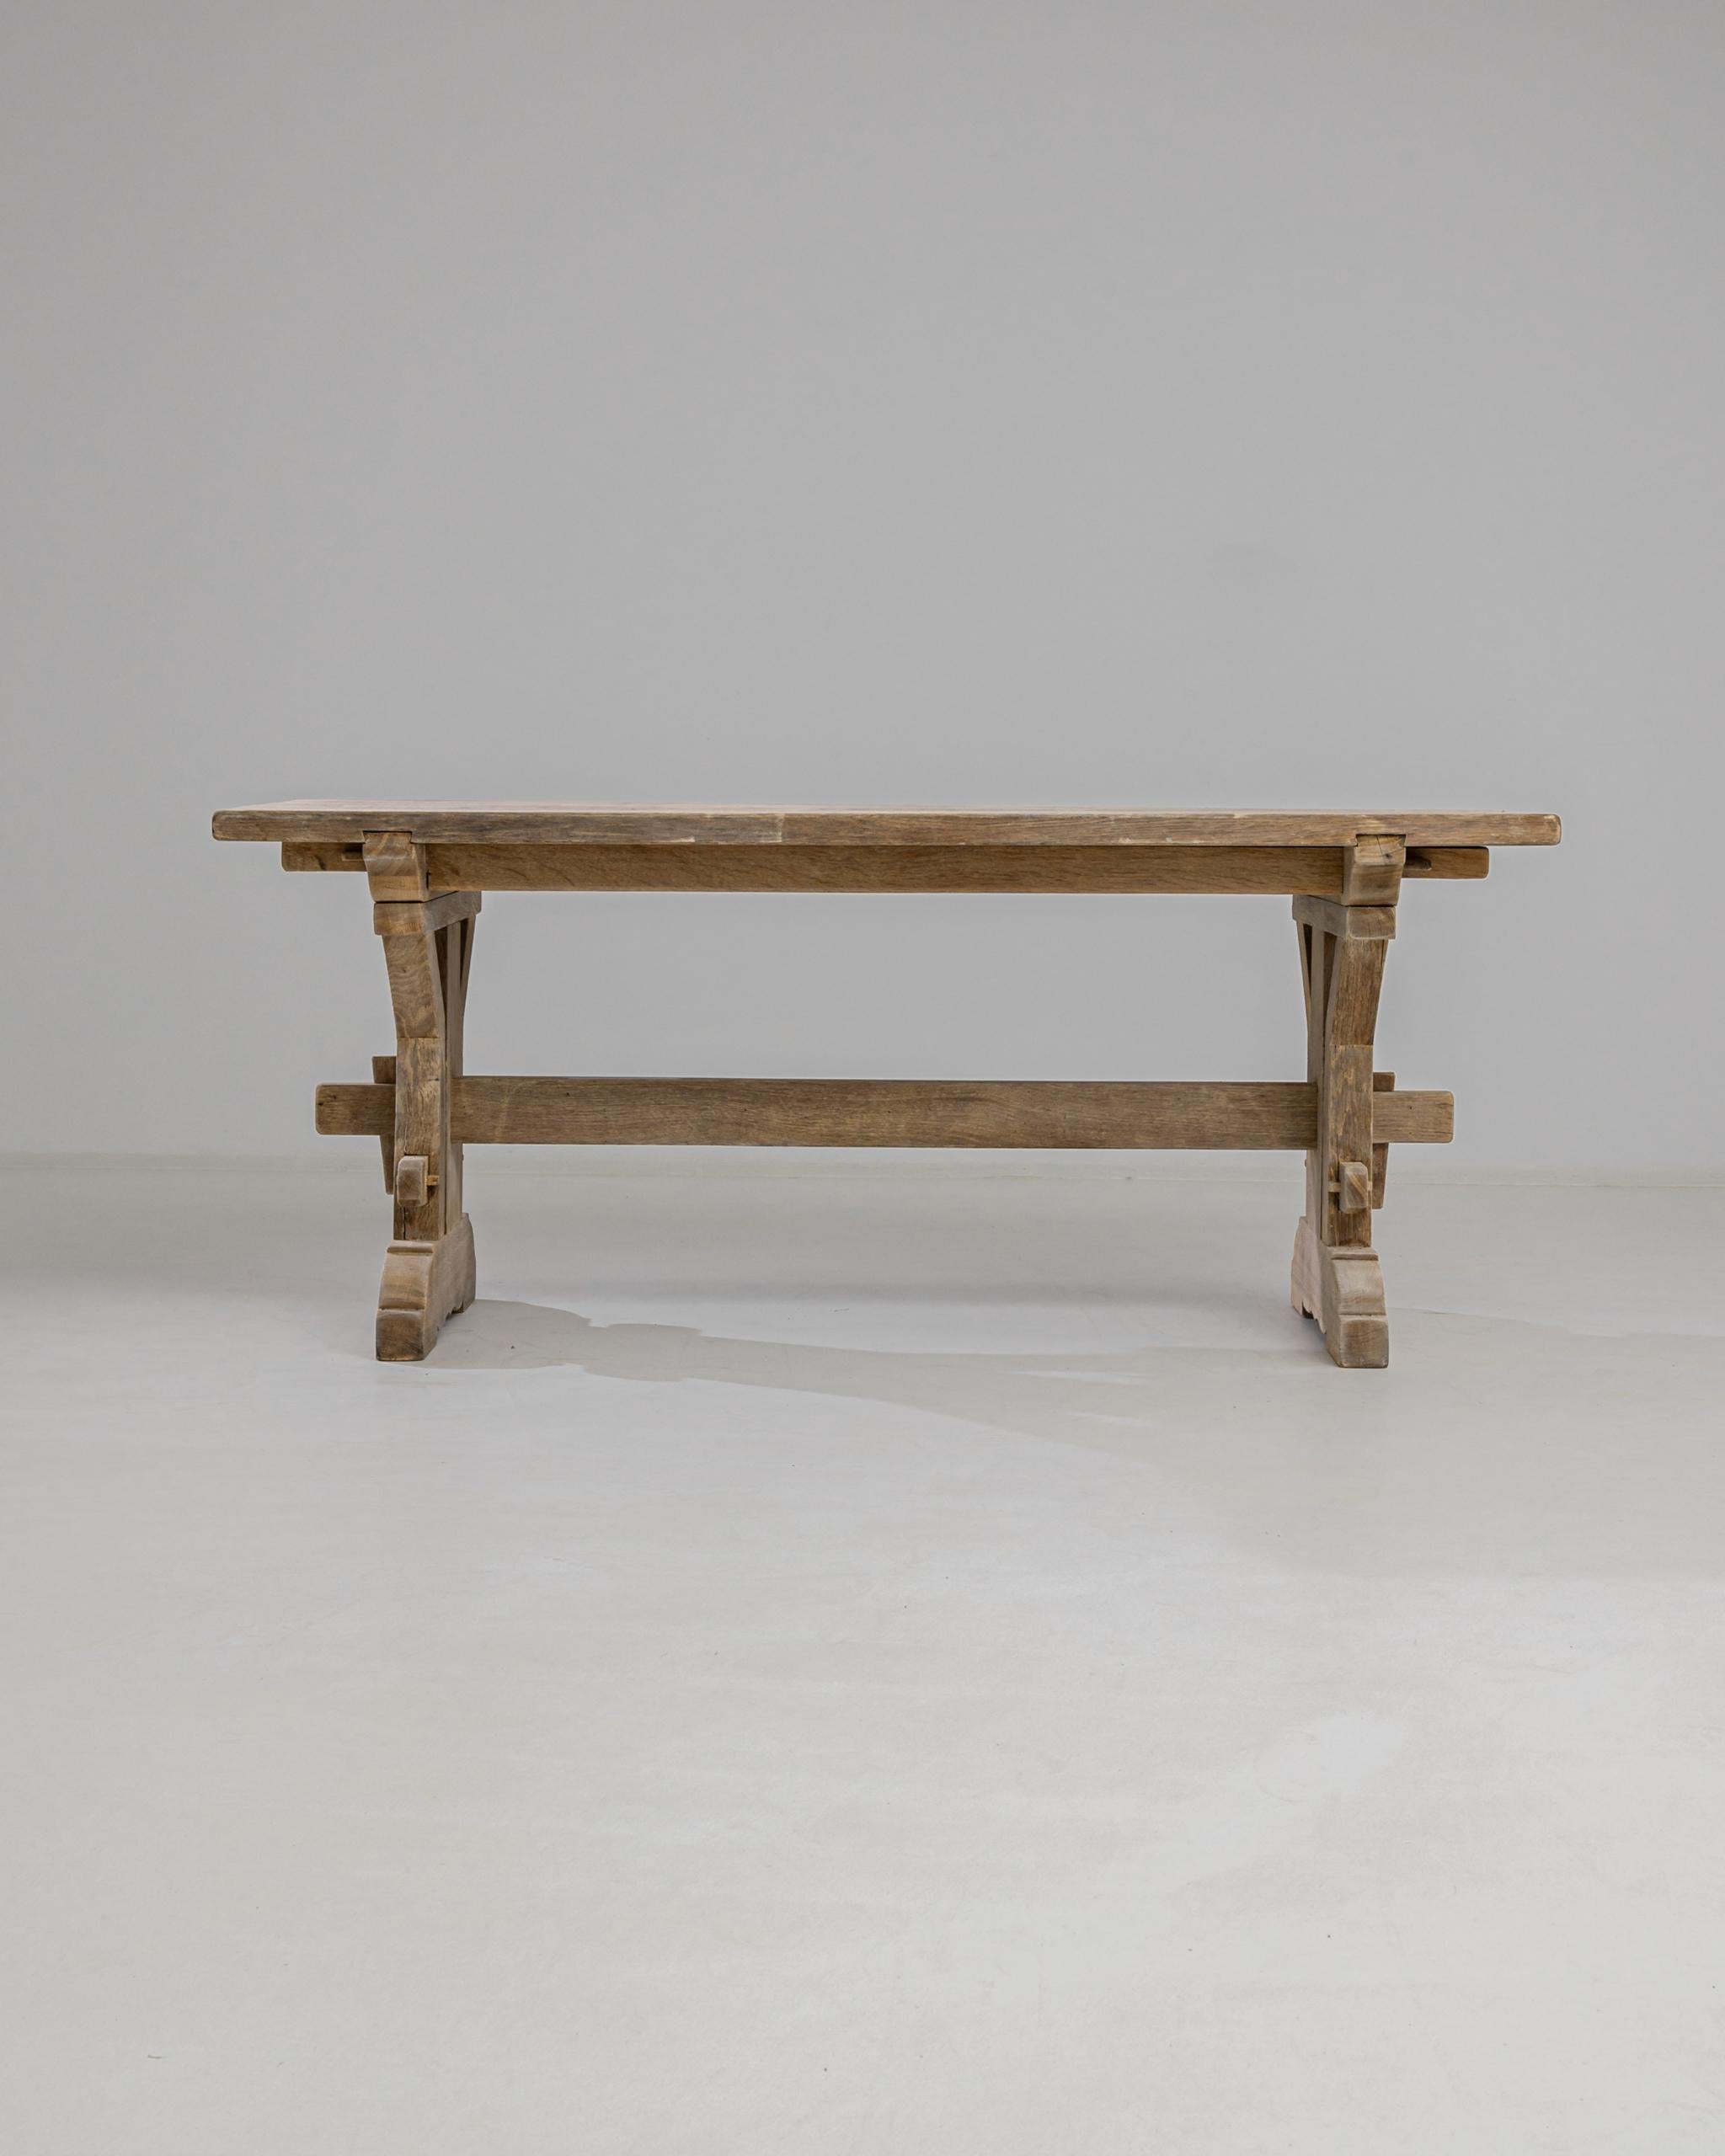 A country dining table in natural oak from 20th Century Belgium. Trestle legs, joined by a stretcher, create a farmhouse silhouette. Visible wooden pegs and rustic mortise and tenon joints showcase the beauty of traditional craftsmanship. The dusky